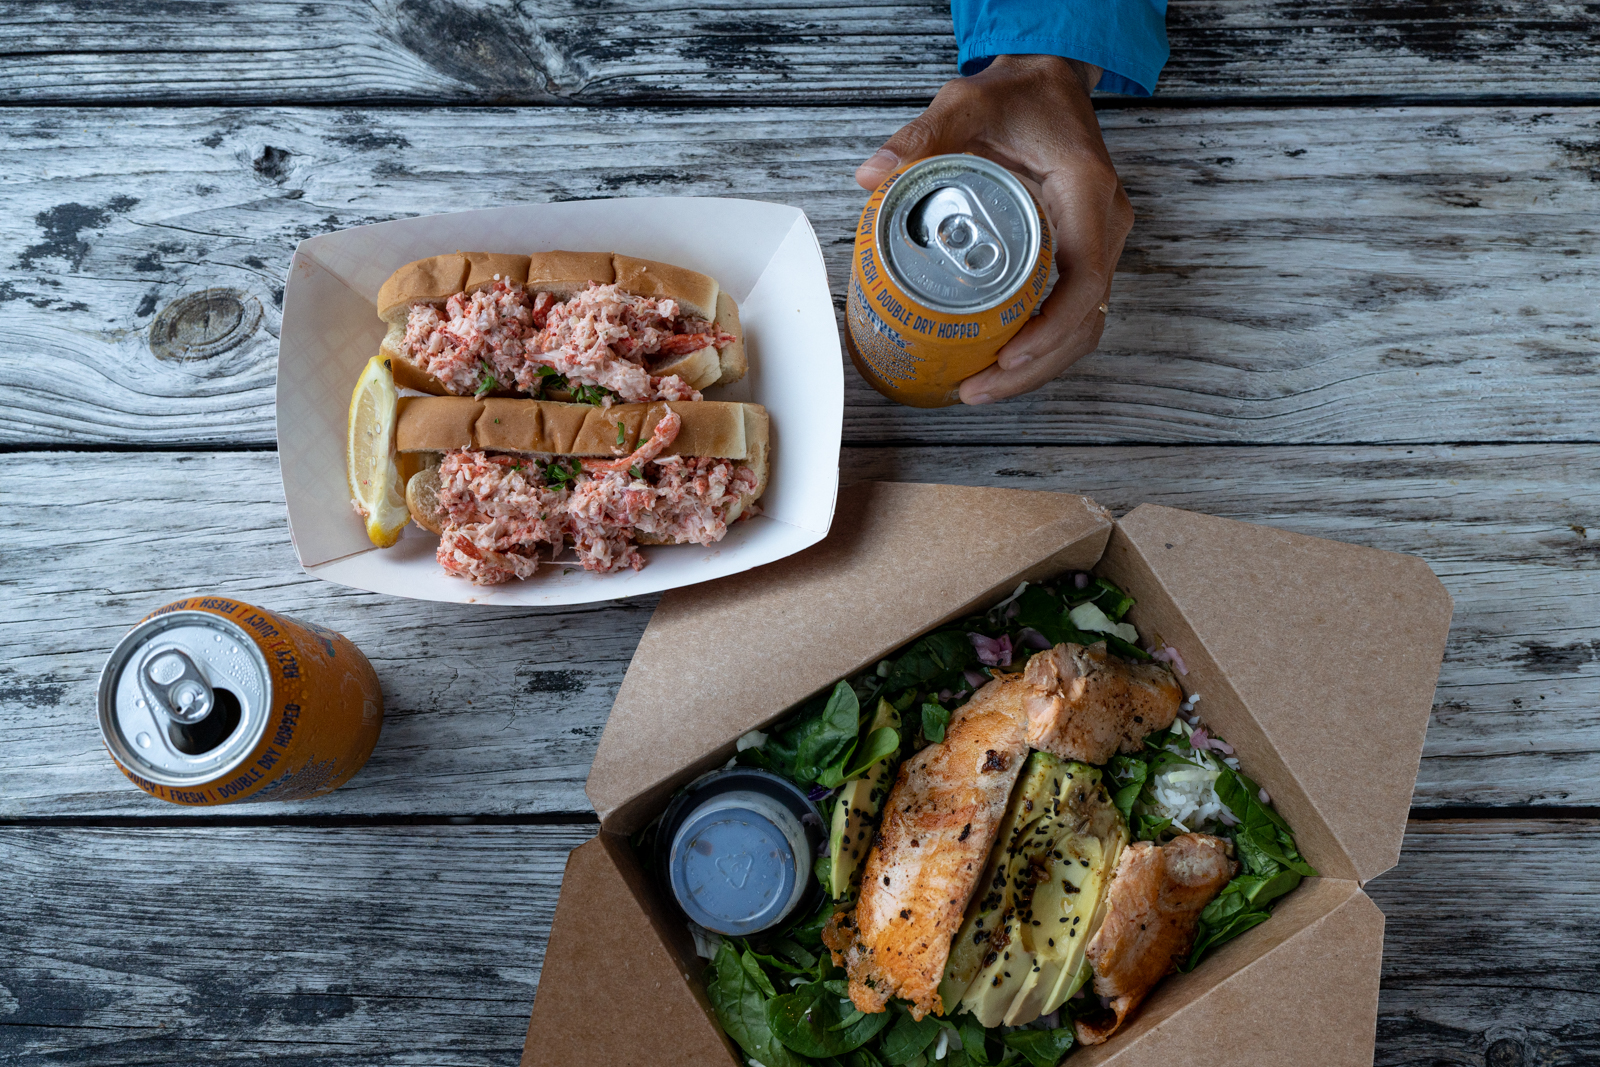 A small hand holds an orange beer can on top of an old wooden picnic table. There is another orange beer can in the bottom left hand corner. There is a white cardboard dish holding two lobster rolls with a lemon wedge and another dish with salad greens, avocado, and grilled salmon in it. A plastic ramakin with dressing is upside down in the same dish.